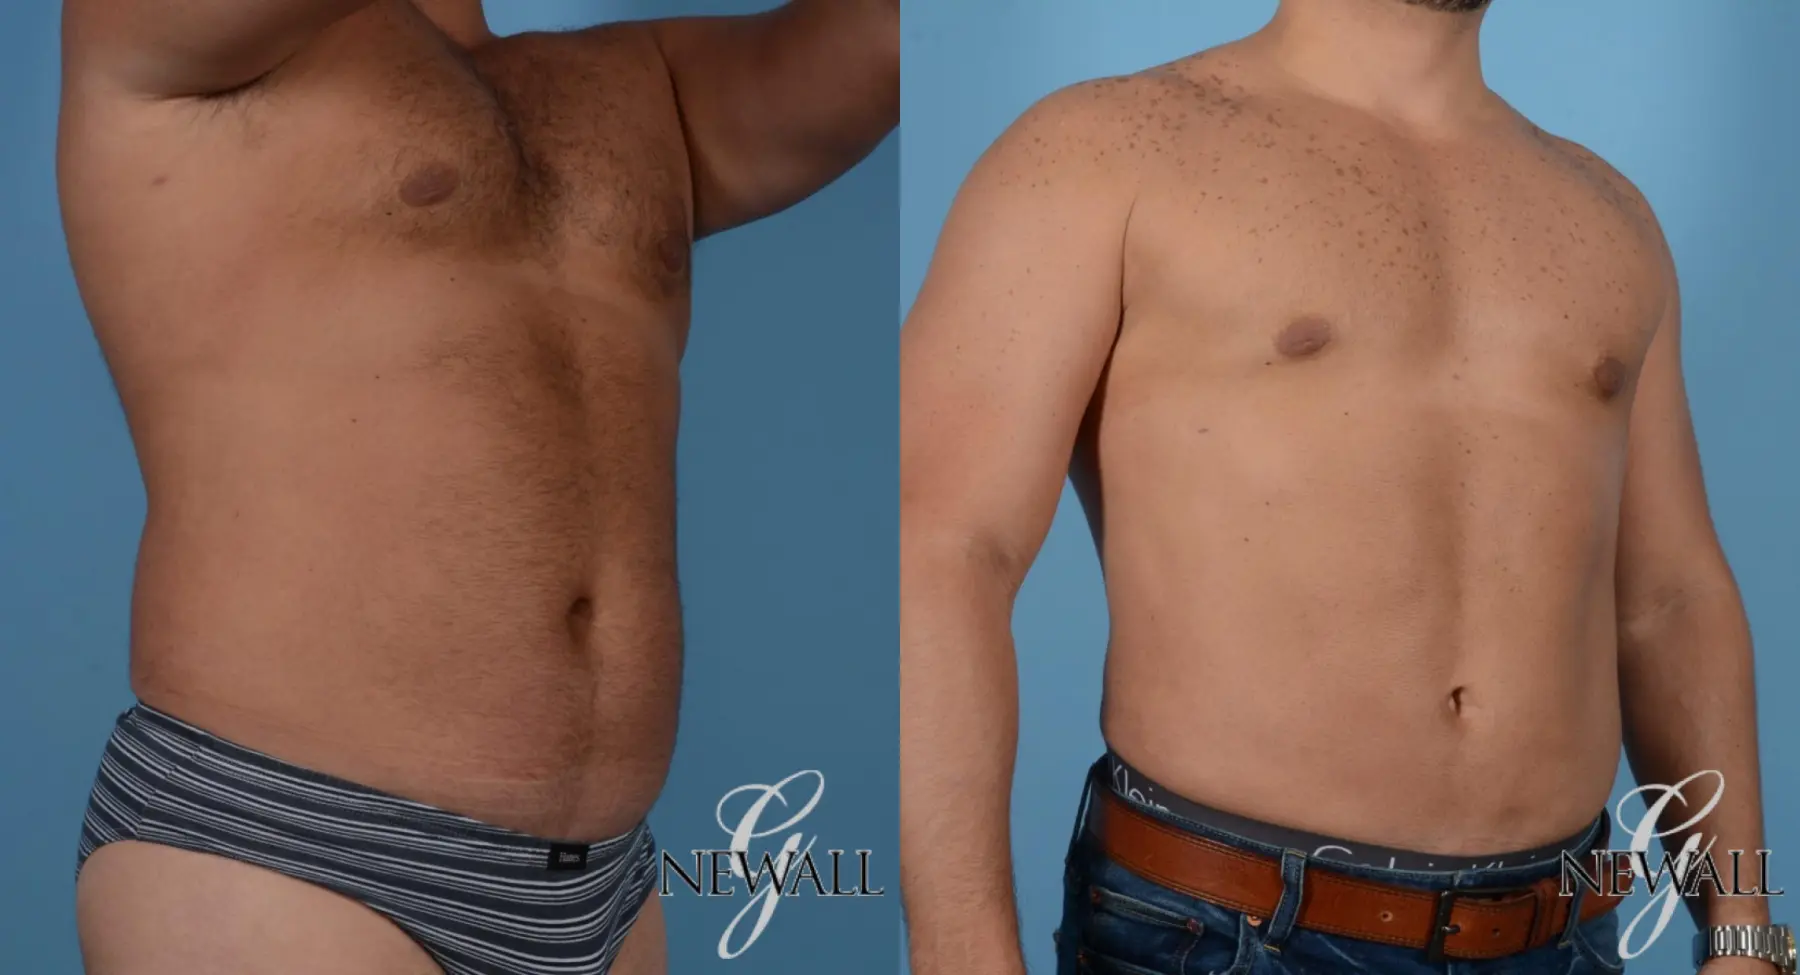 Man Shares Abdominal Etching Surgery Before and After Photos